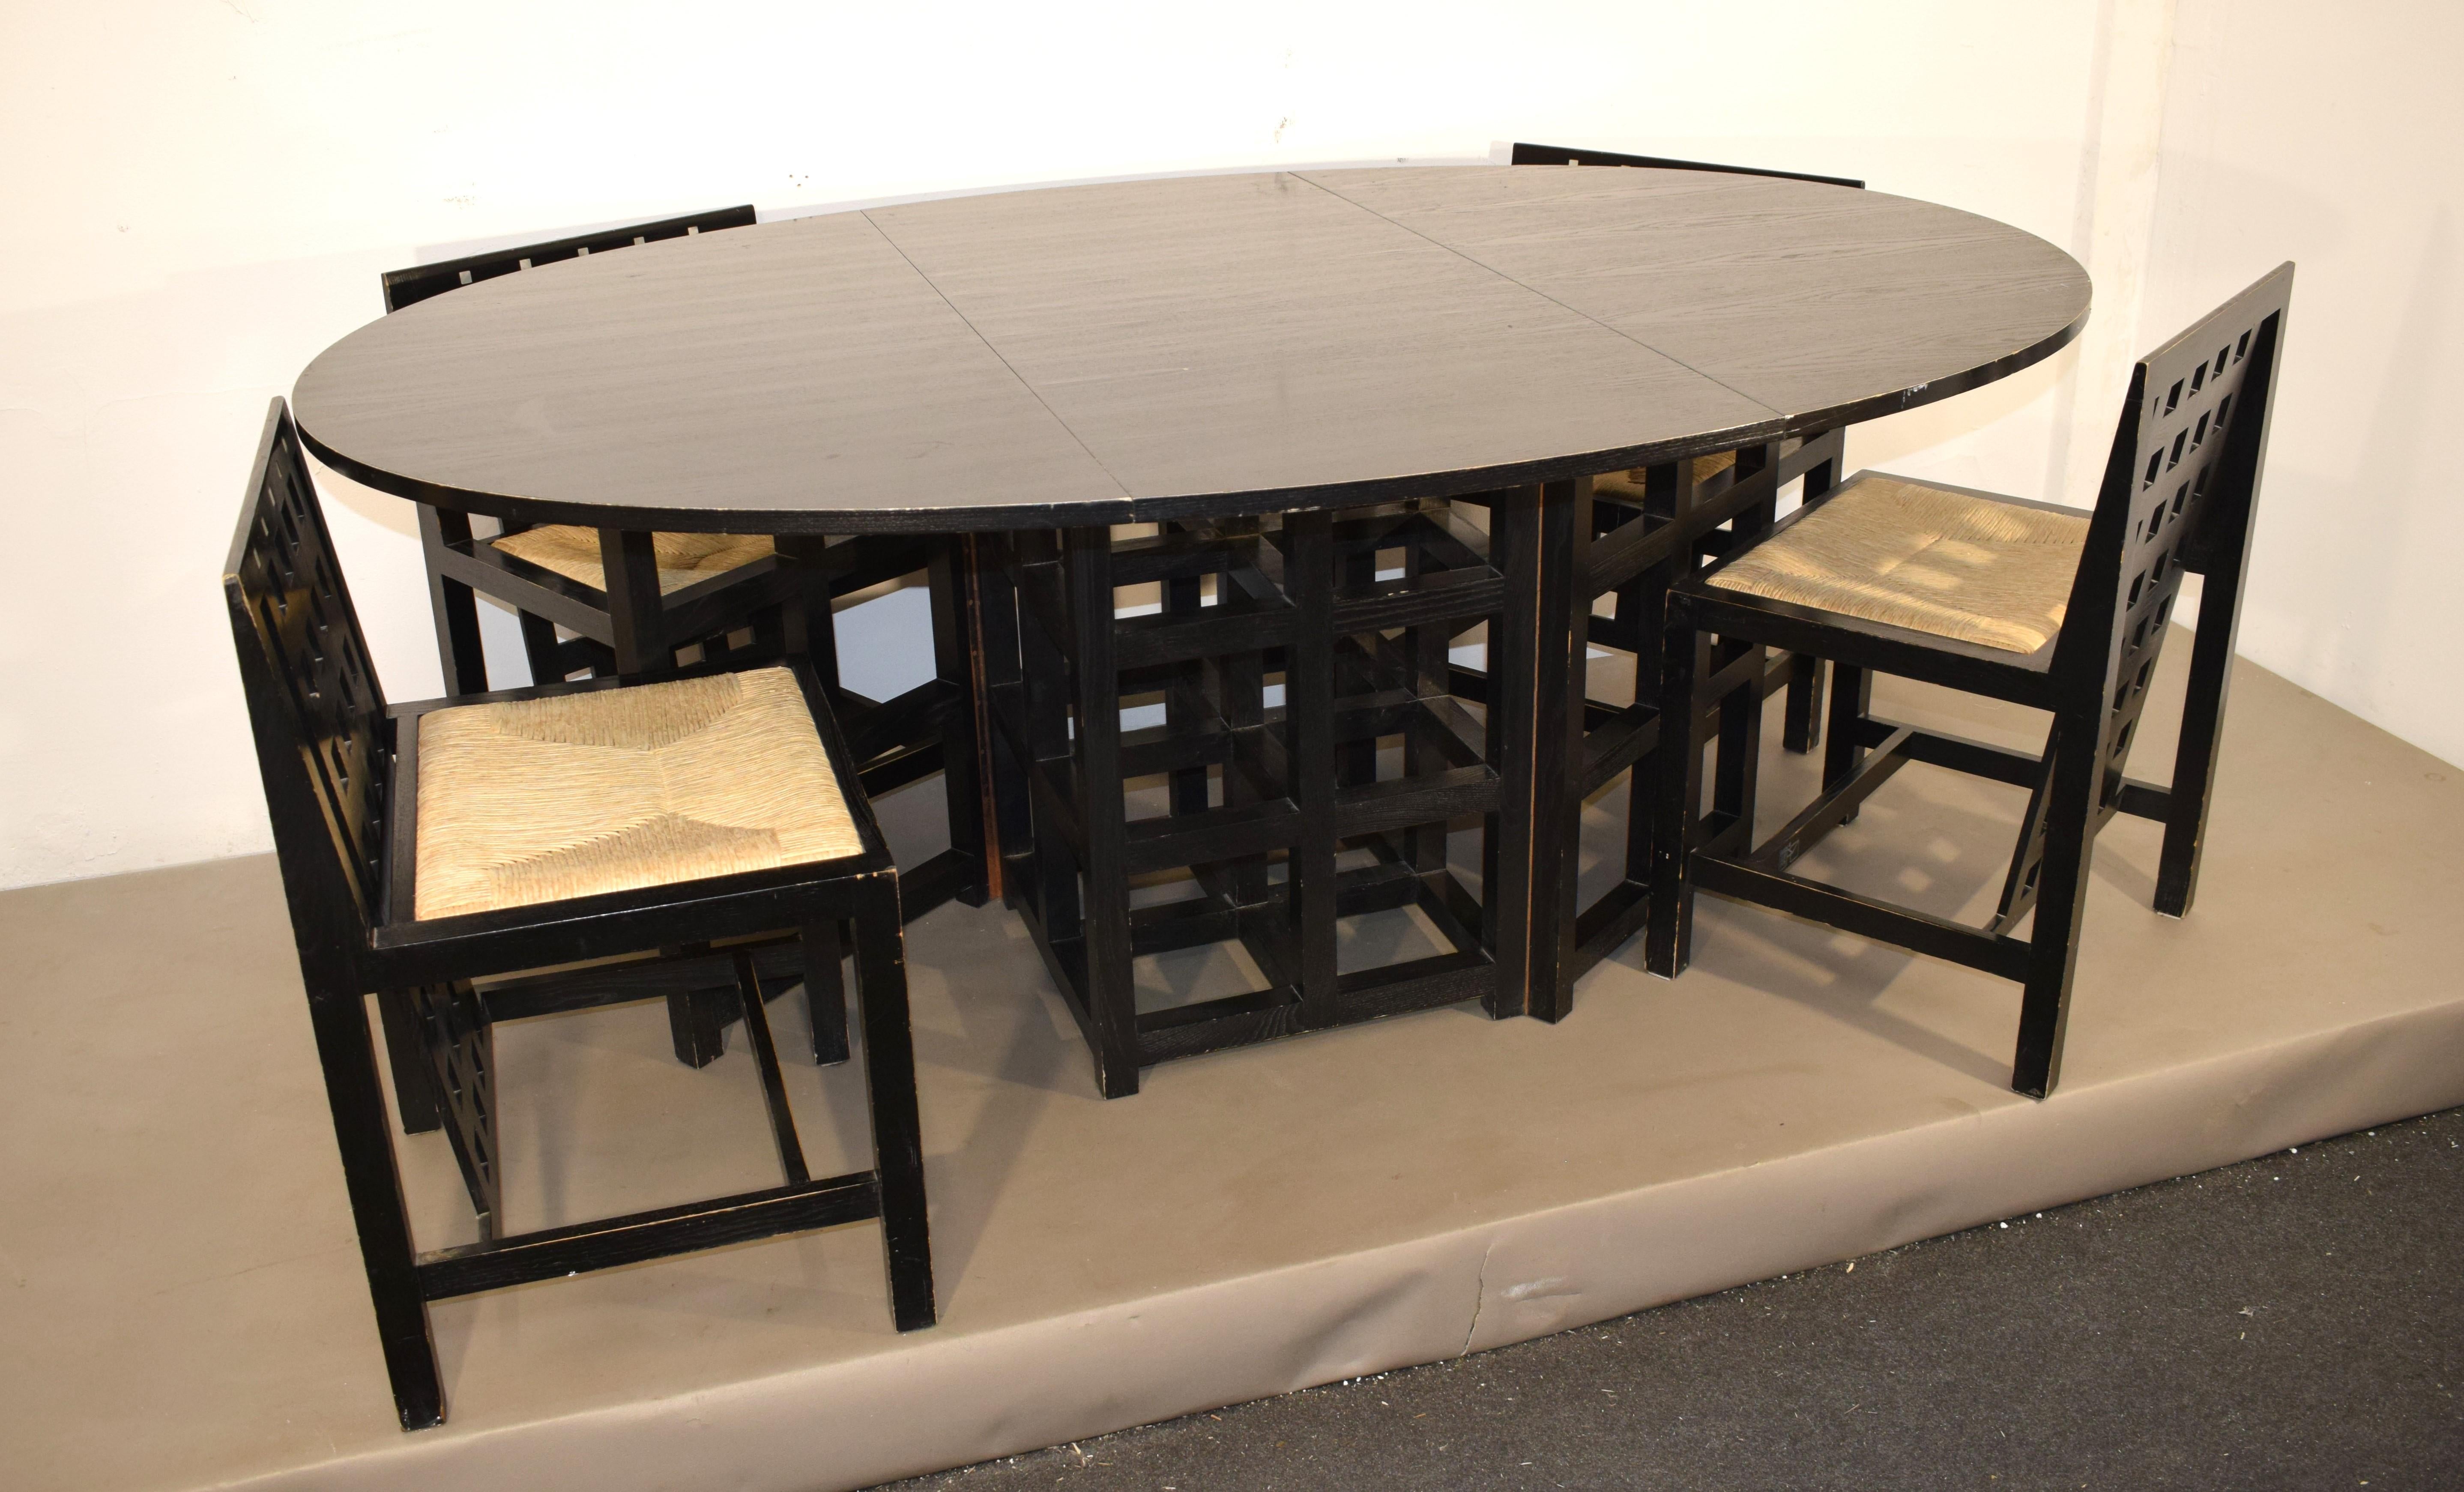 Dining table and 4 chairs by Charles Rennie Mackintosh for Cassina, 1970s.
Dimensions: 
open table H= 75 cm; W= 177 cm; D= 125.
closed table H= 75 cm; W= 125 cm; D= 58 cm.
chair H= 75 cm; W= 49 cm; D= 45 cm; H seat= 45 cm. 
